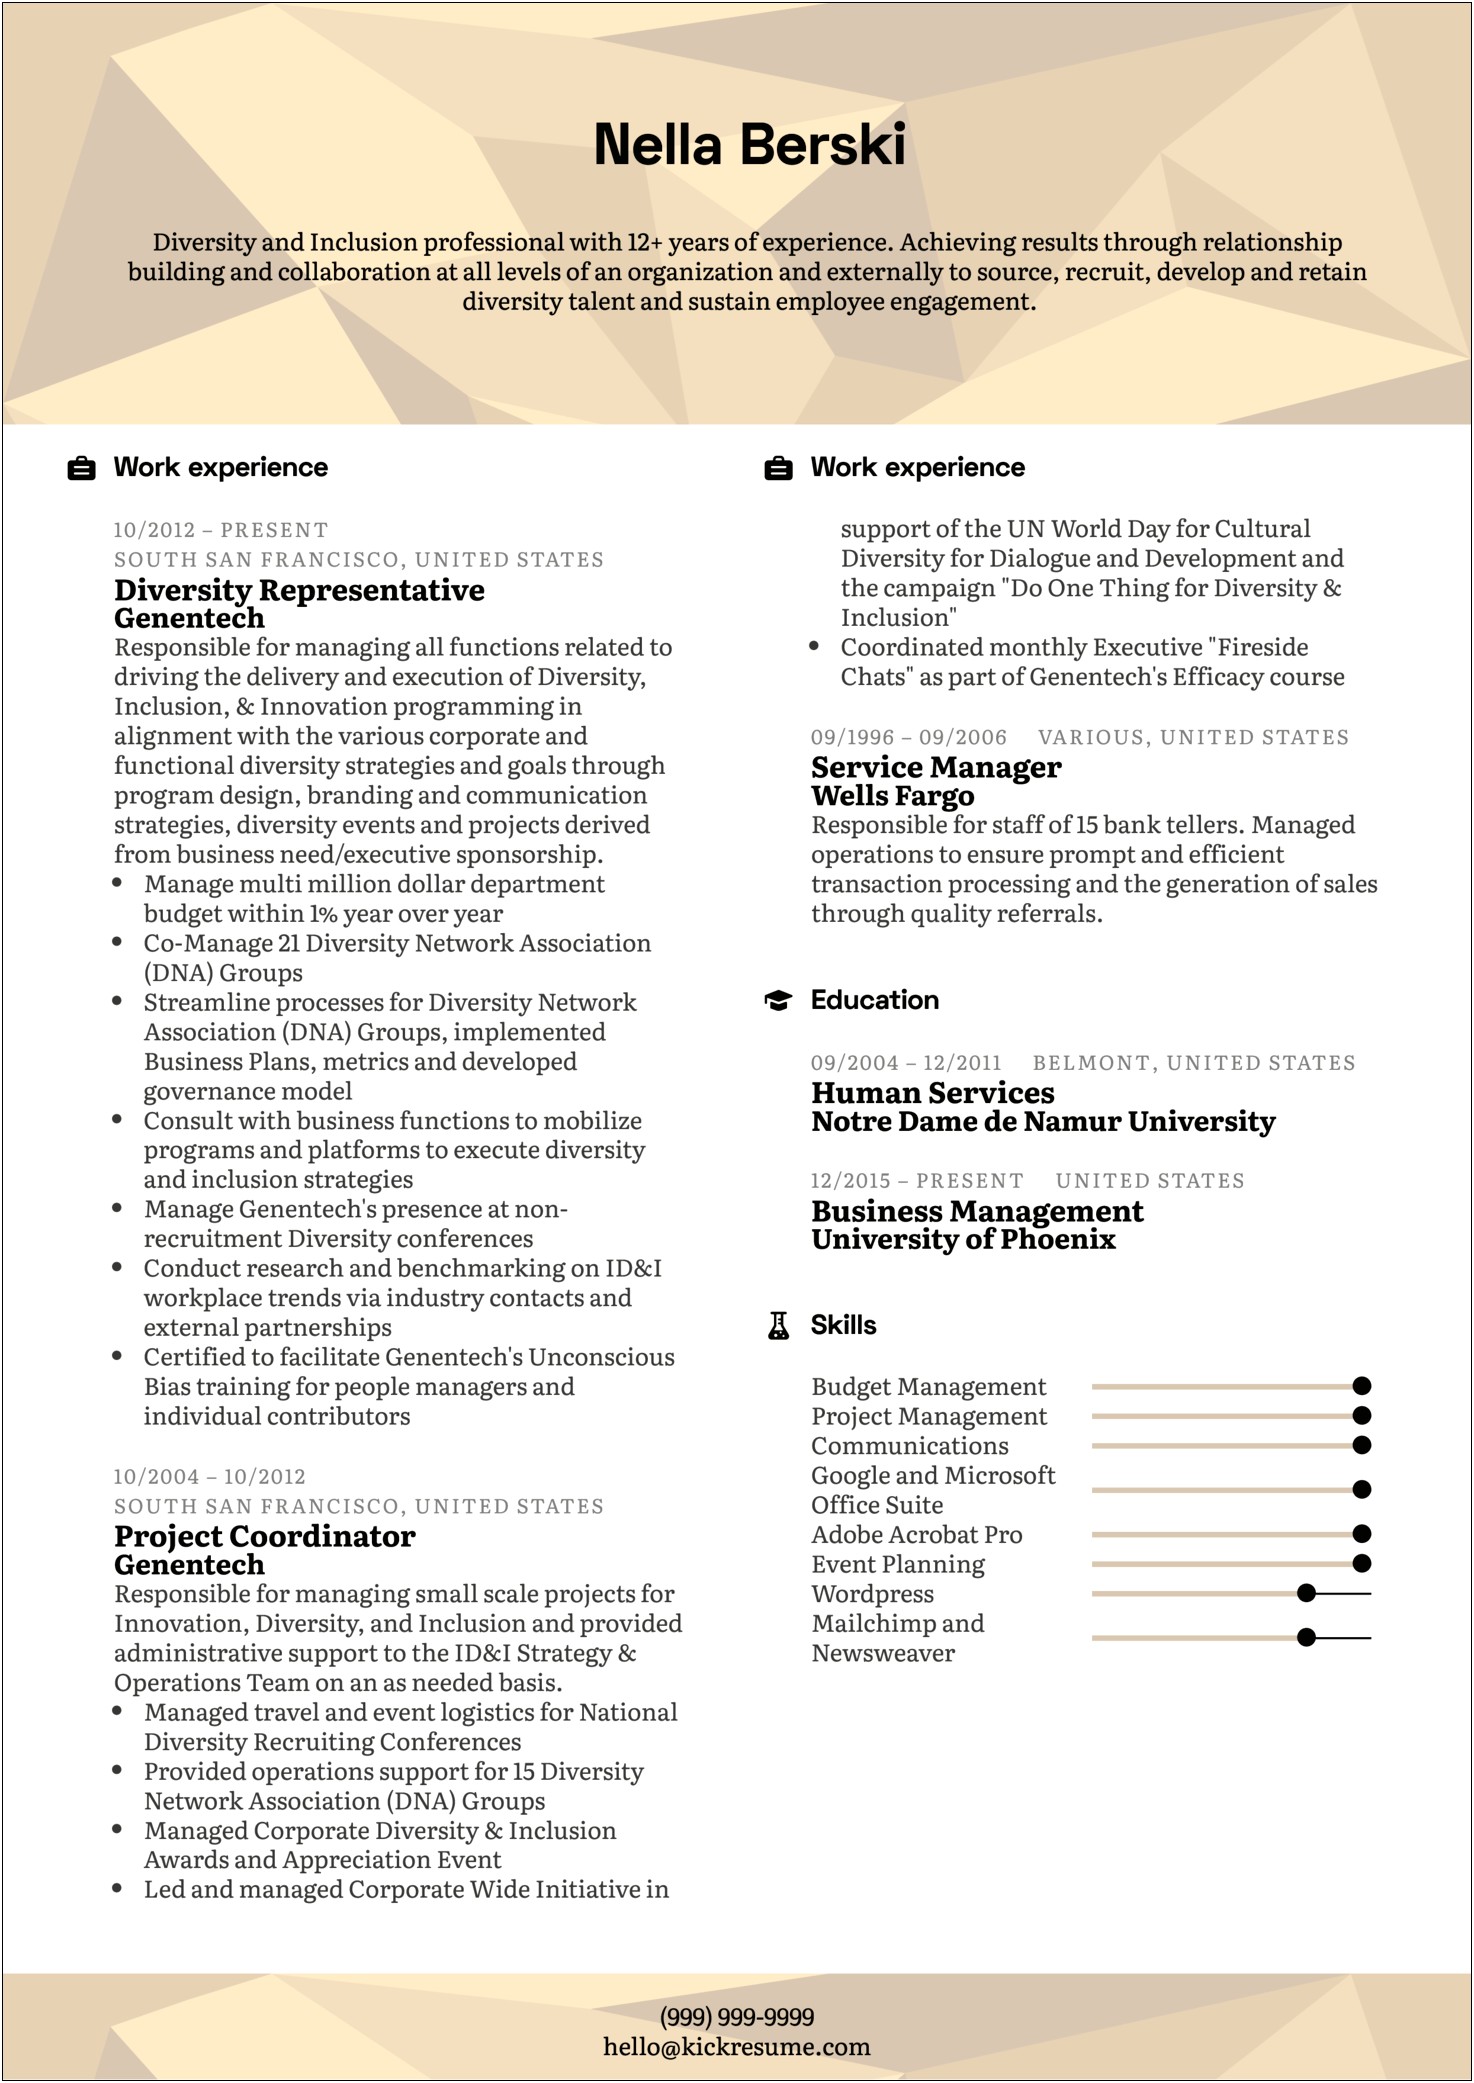 Wording For Resume Experience Working With Diverse Populations